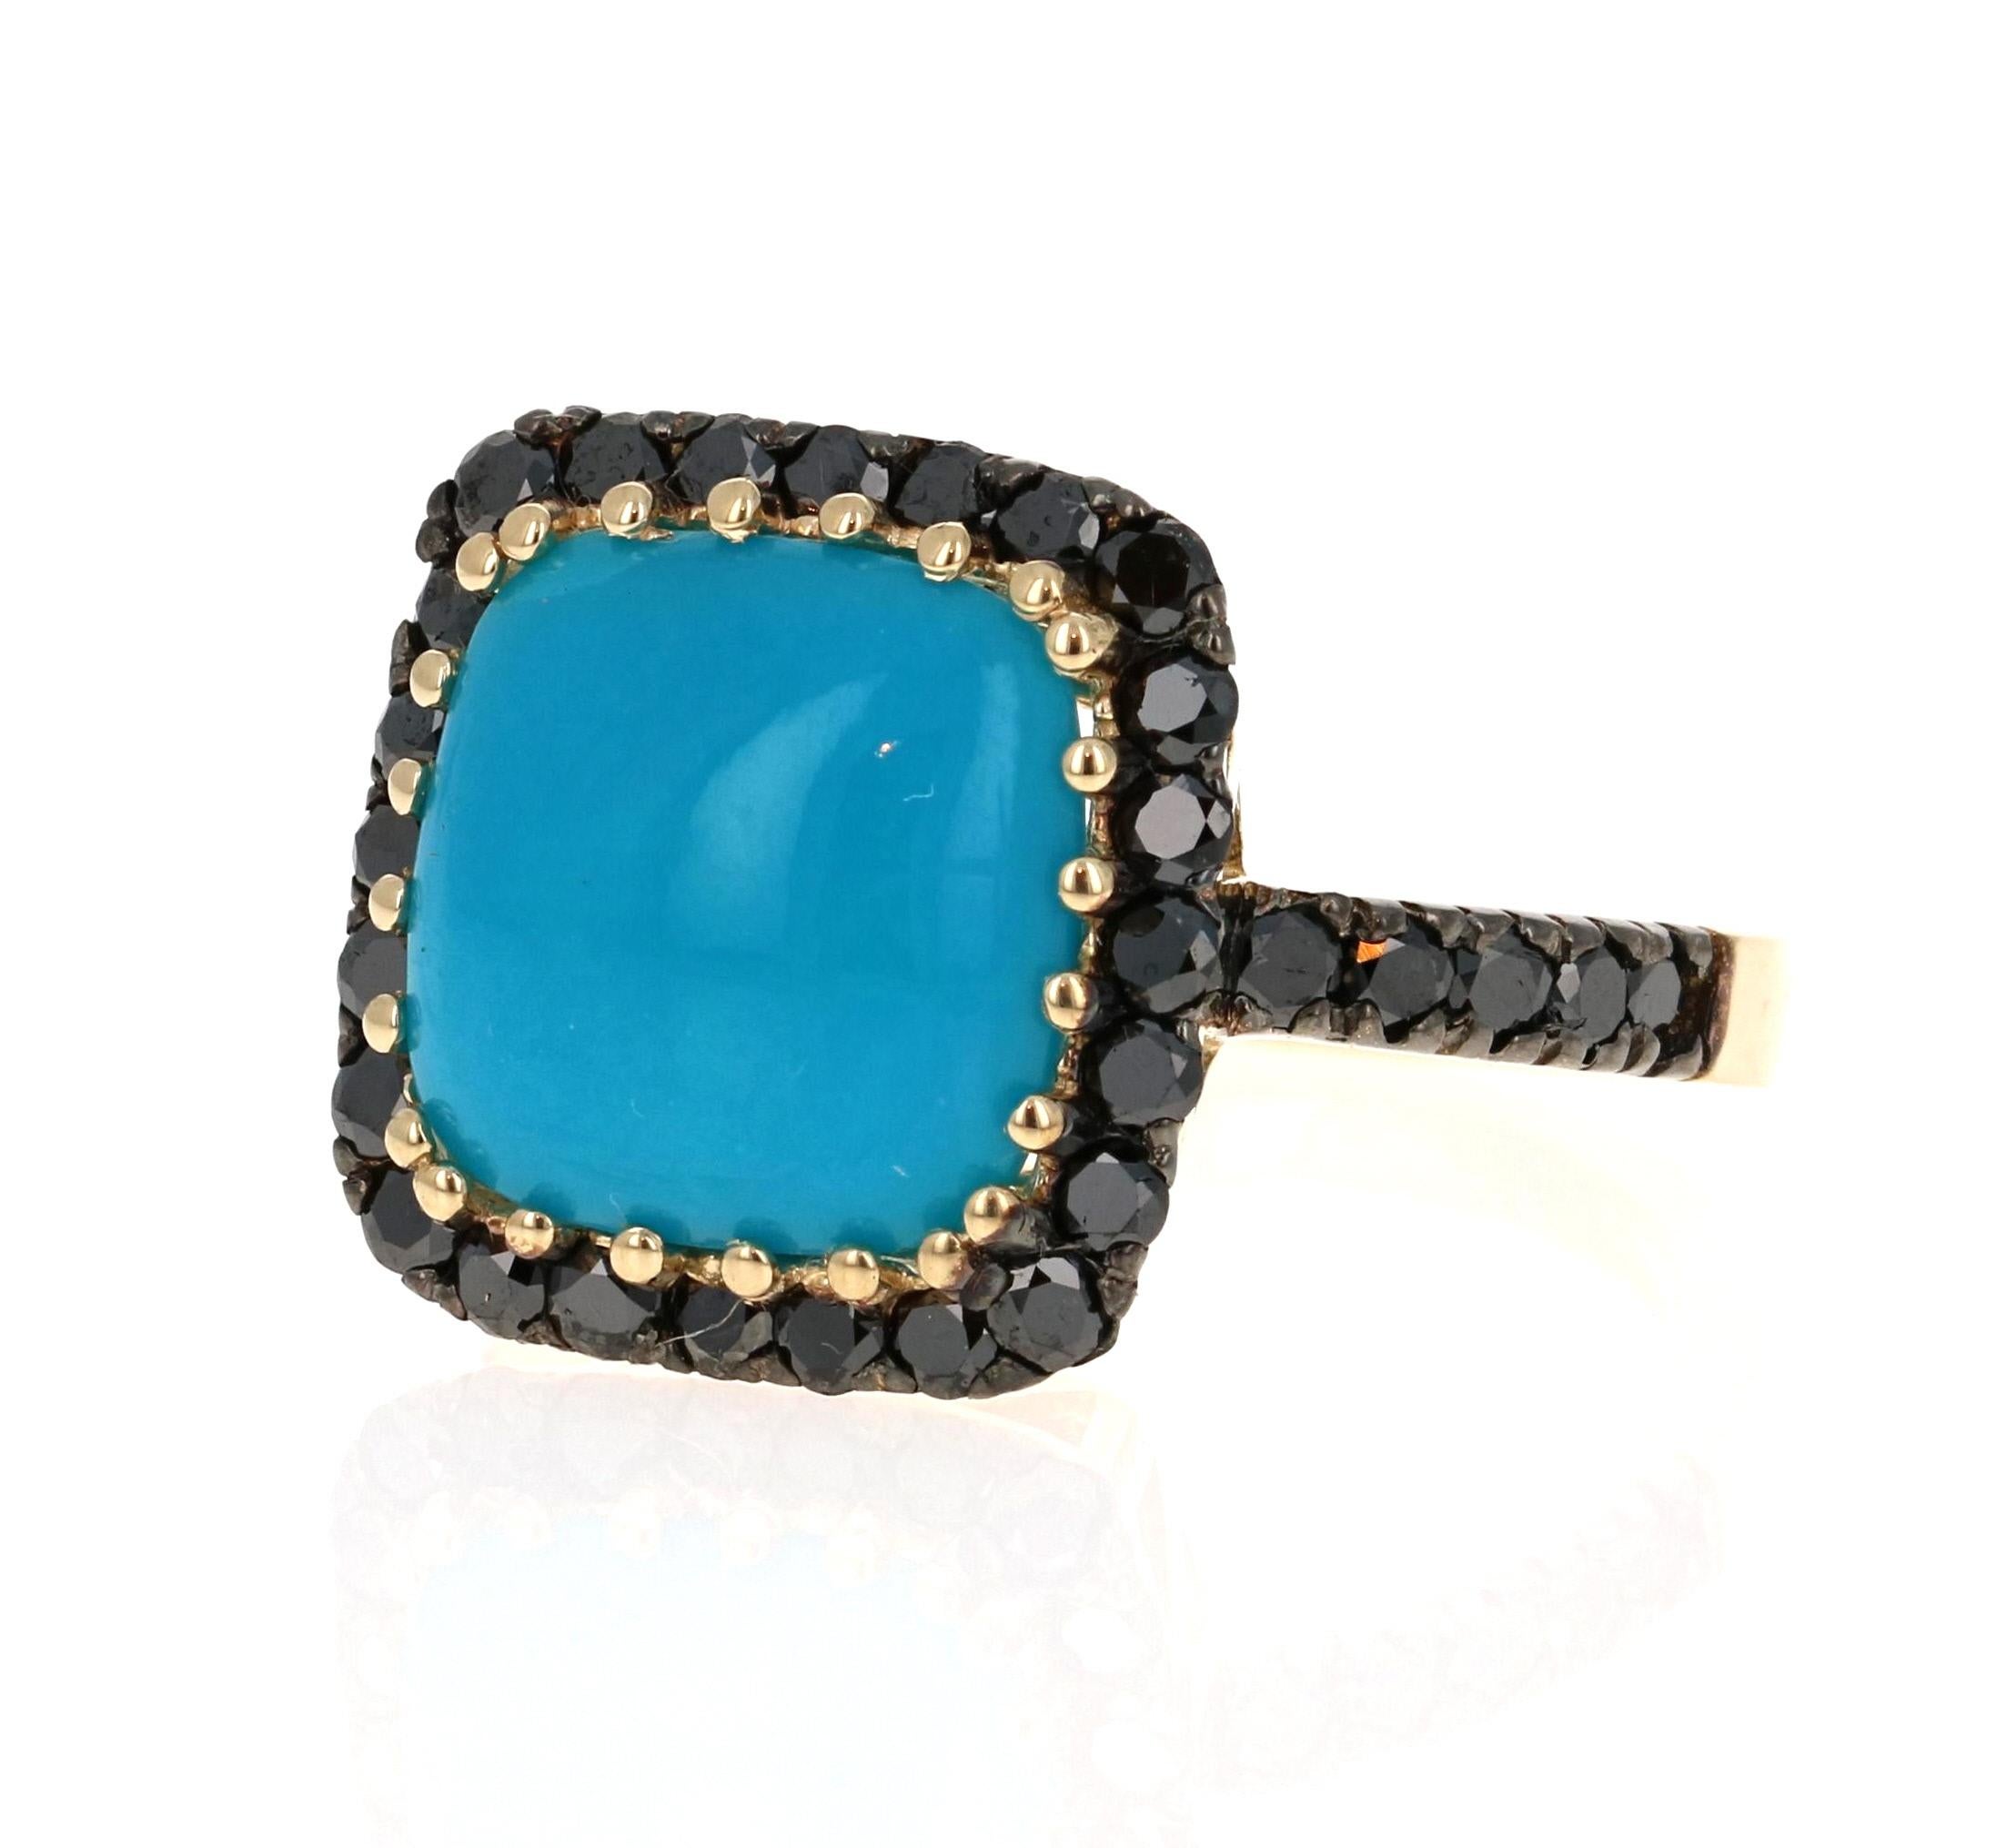 A unique stunner! 

This ring has a 5.10 Carat Cushion Cut Turquoise and is surrounded by 34 Black Round Cut Diamonds that weigh 1.04 Carats. The total carat weight of the ring is 6.14 Carats.   The turquoise measurements are 11mm x 11mm.

The ring